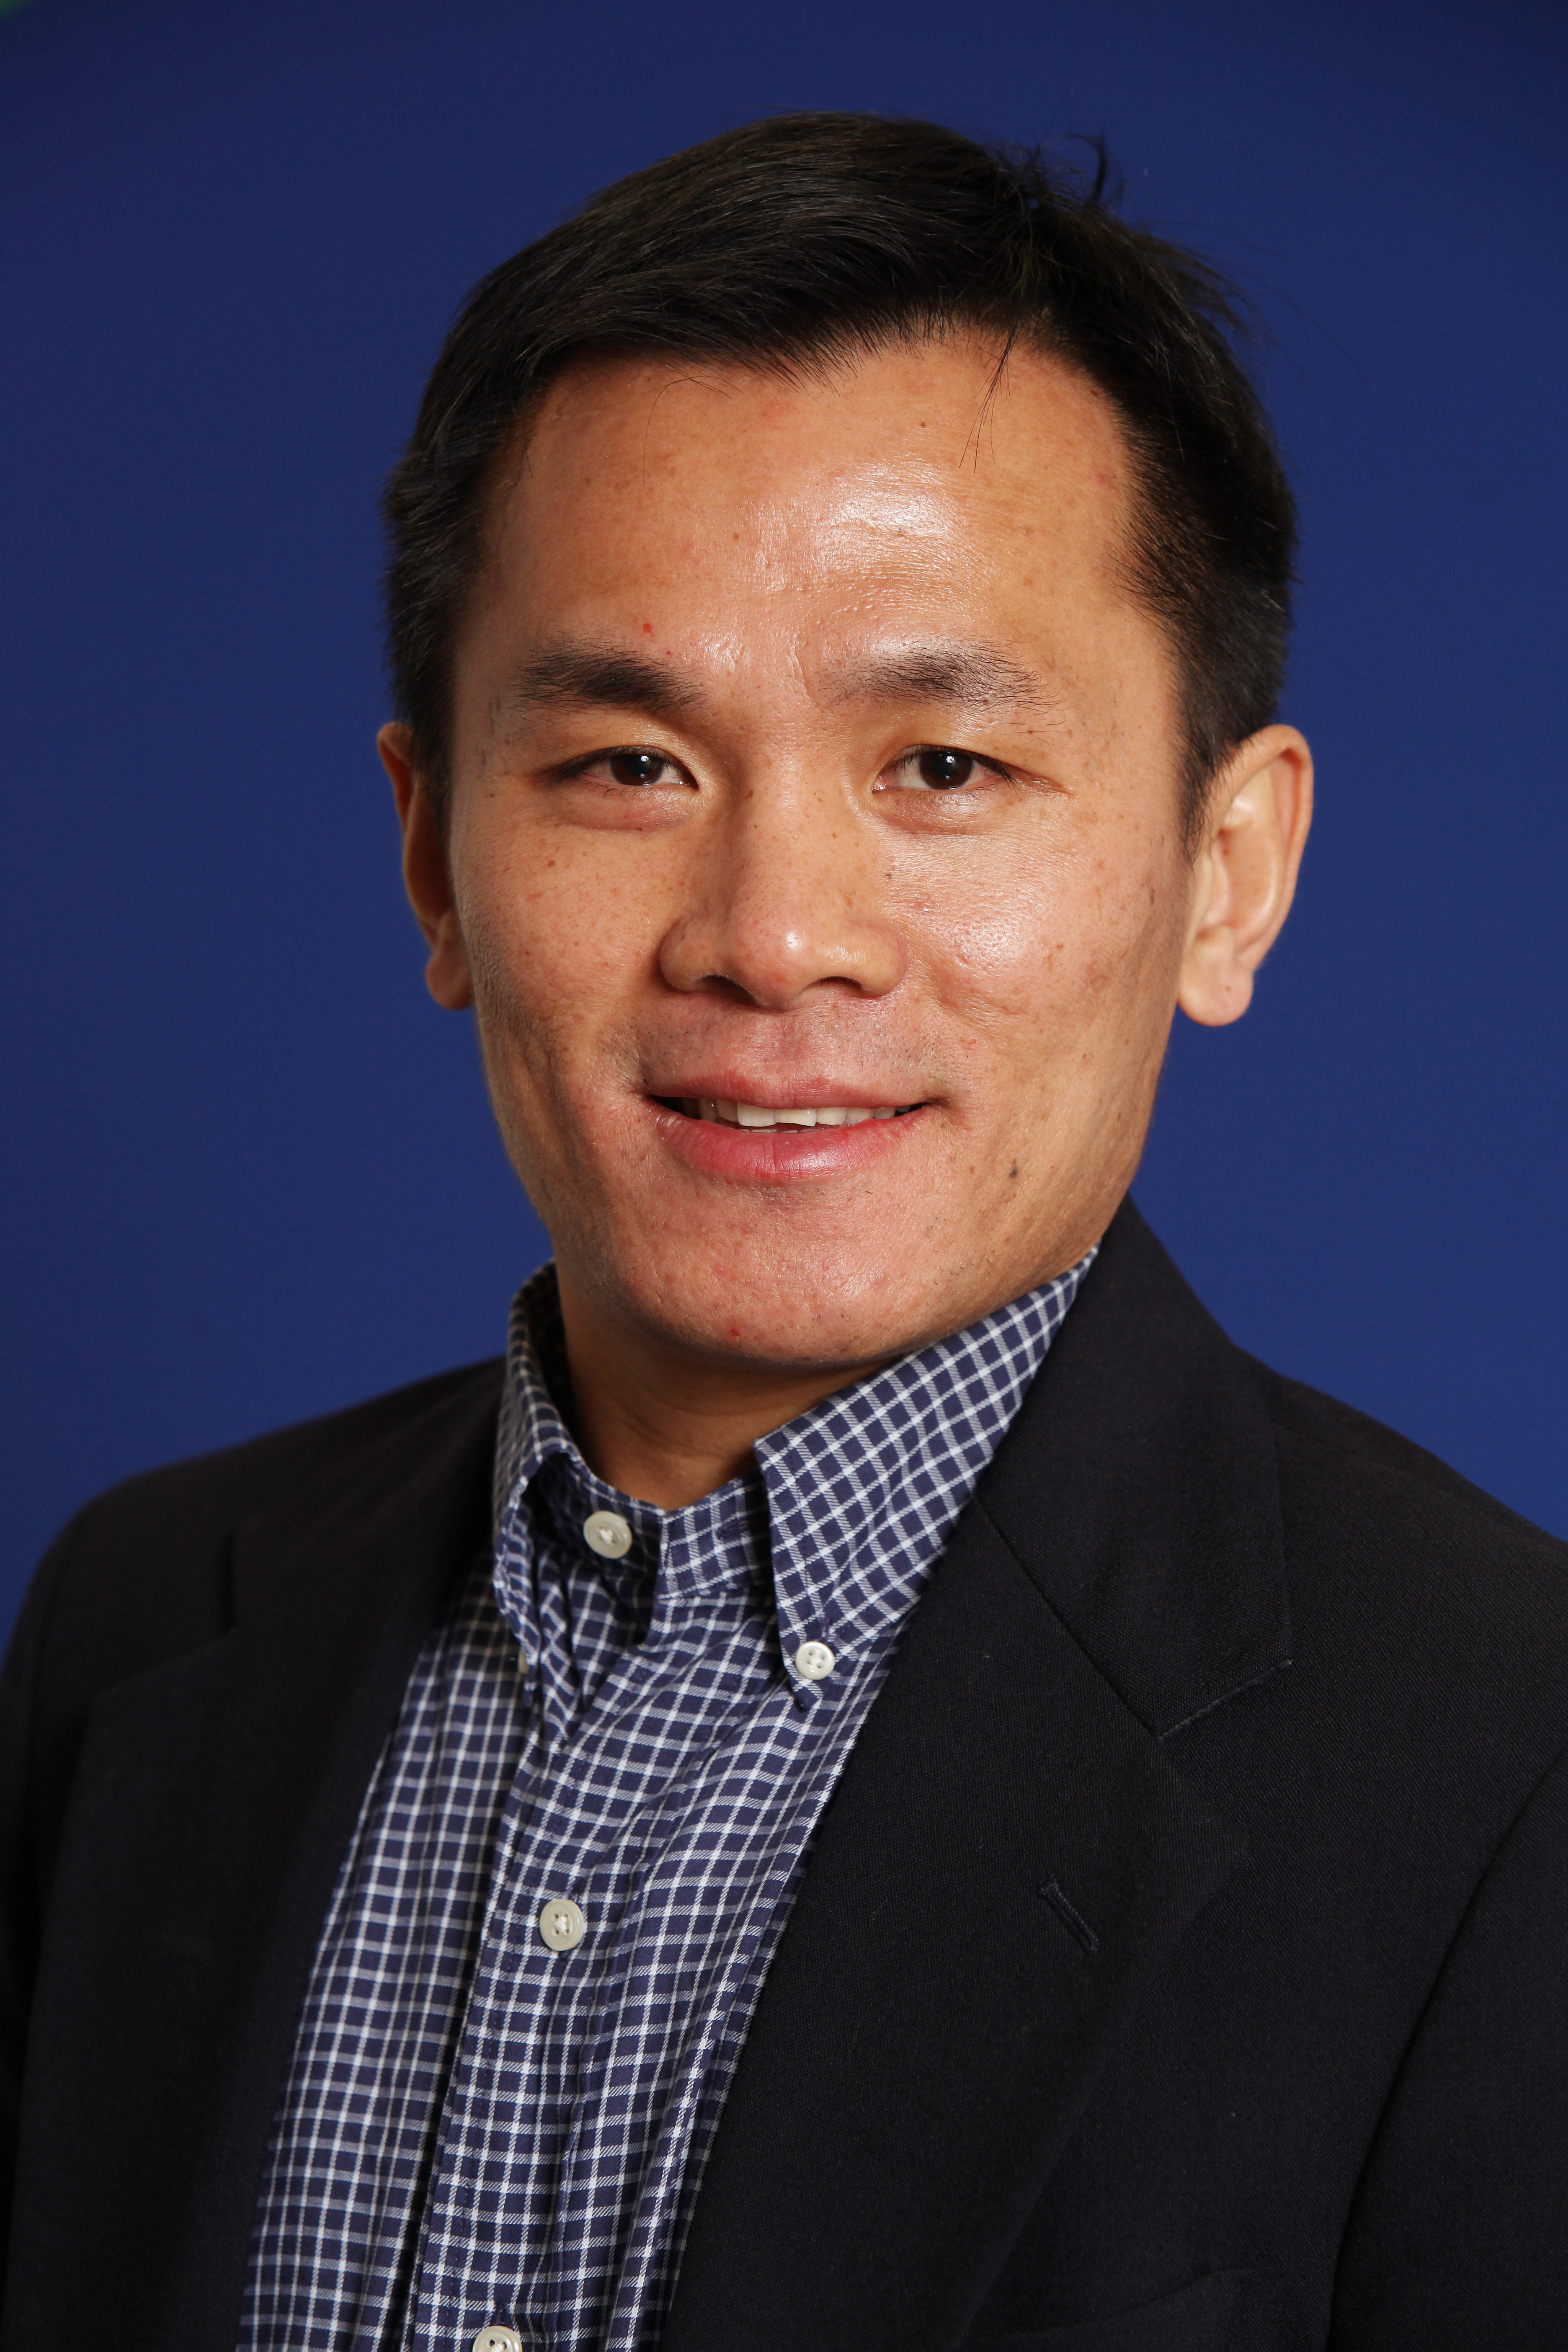 Dr. Chung Hao Chen